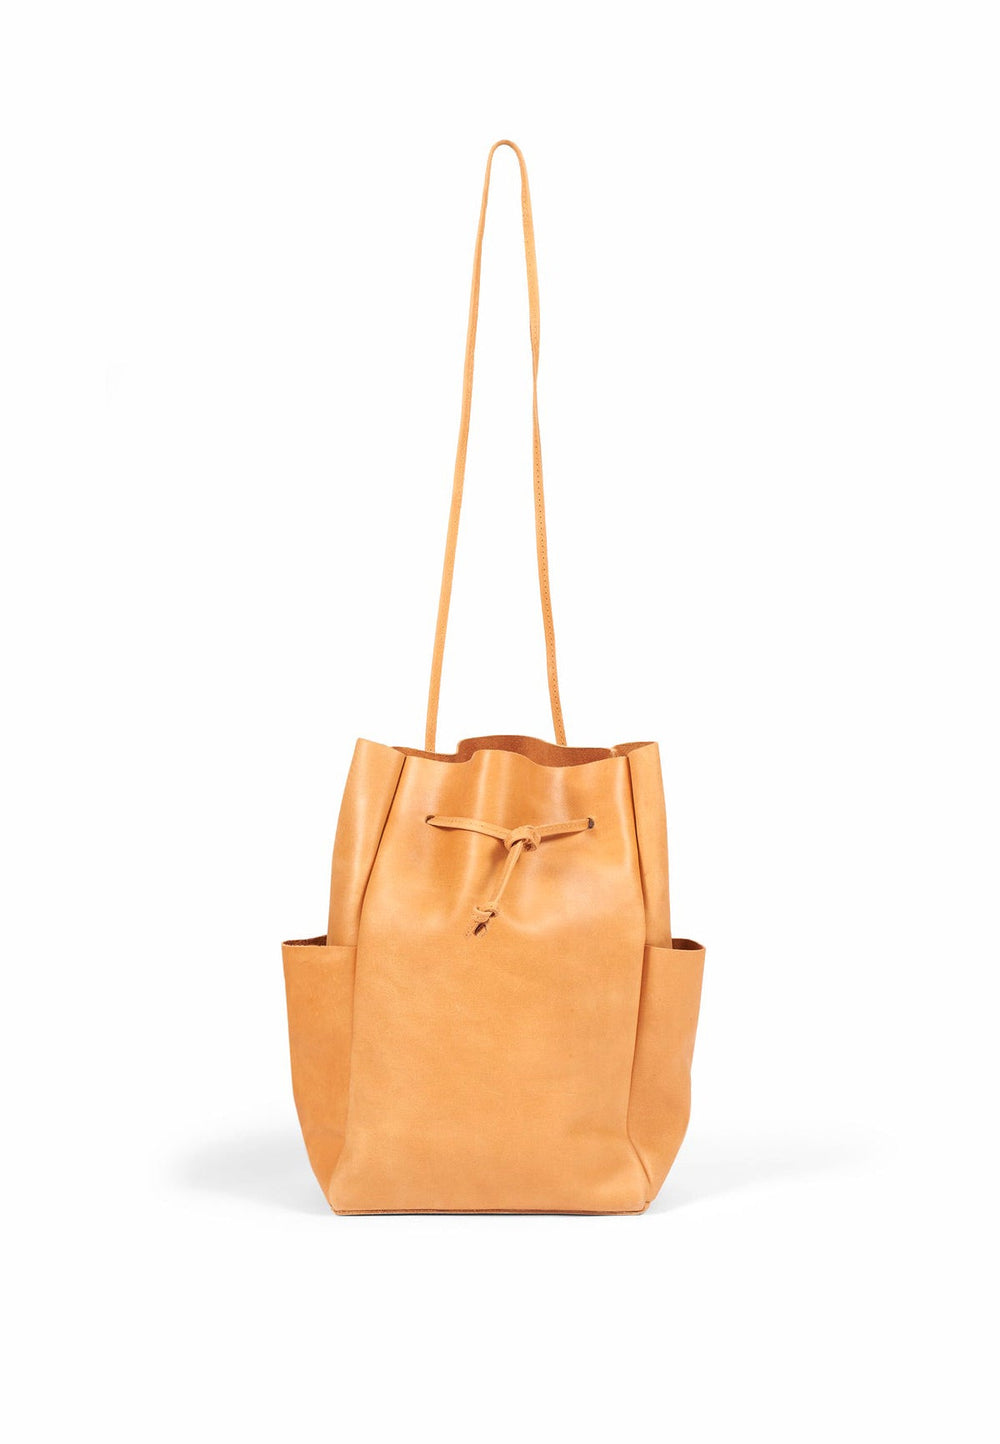 LEATHER TOTE BAG THIN STRAPS CAMEL - Moeon